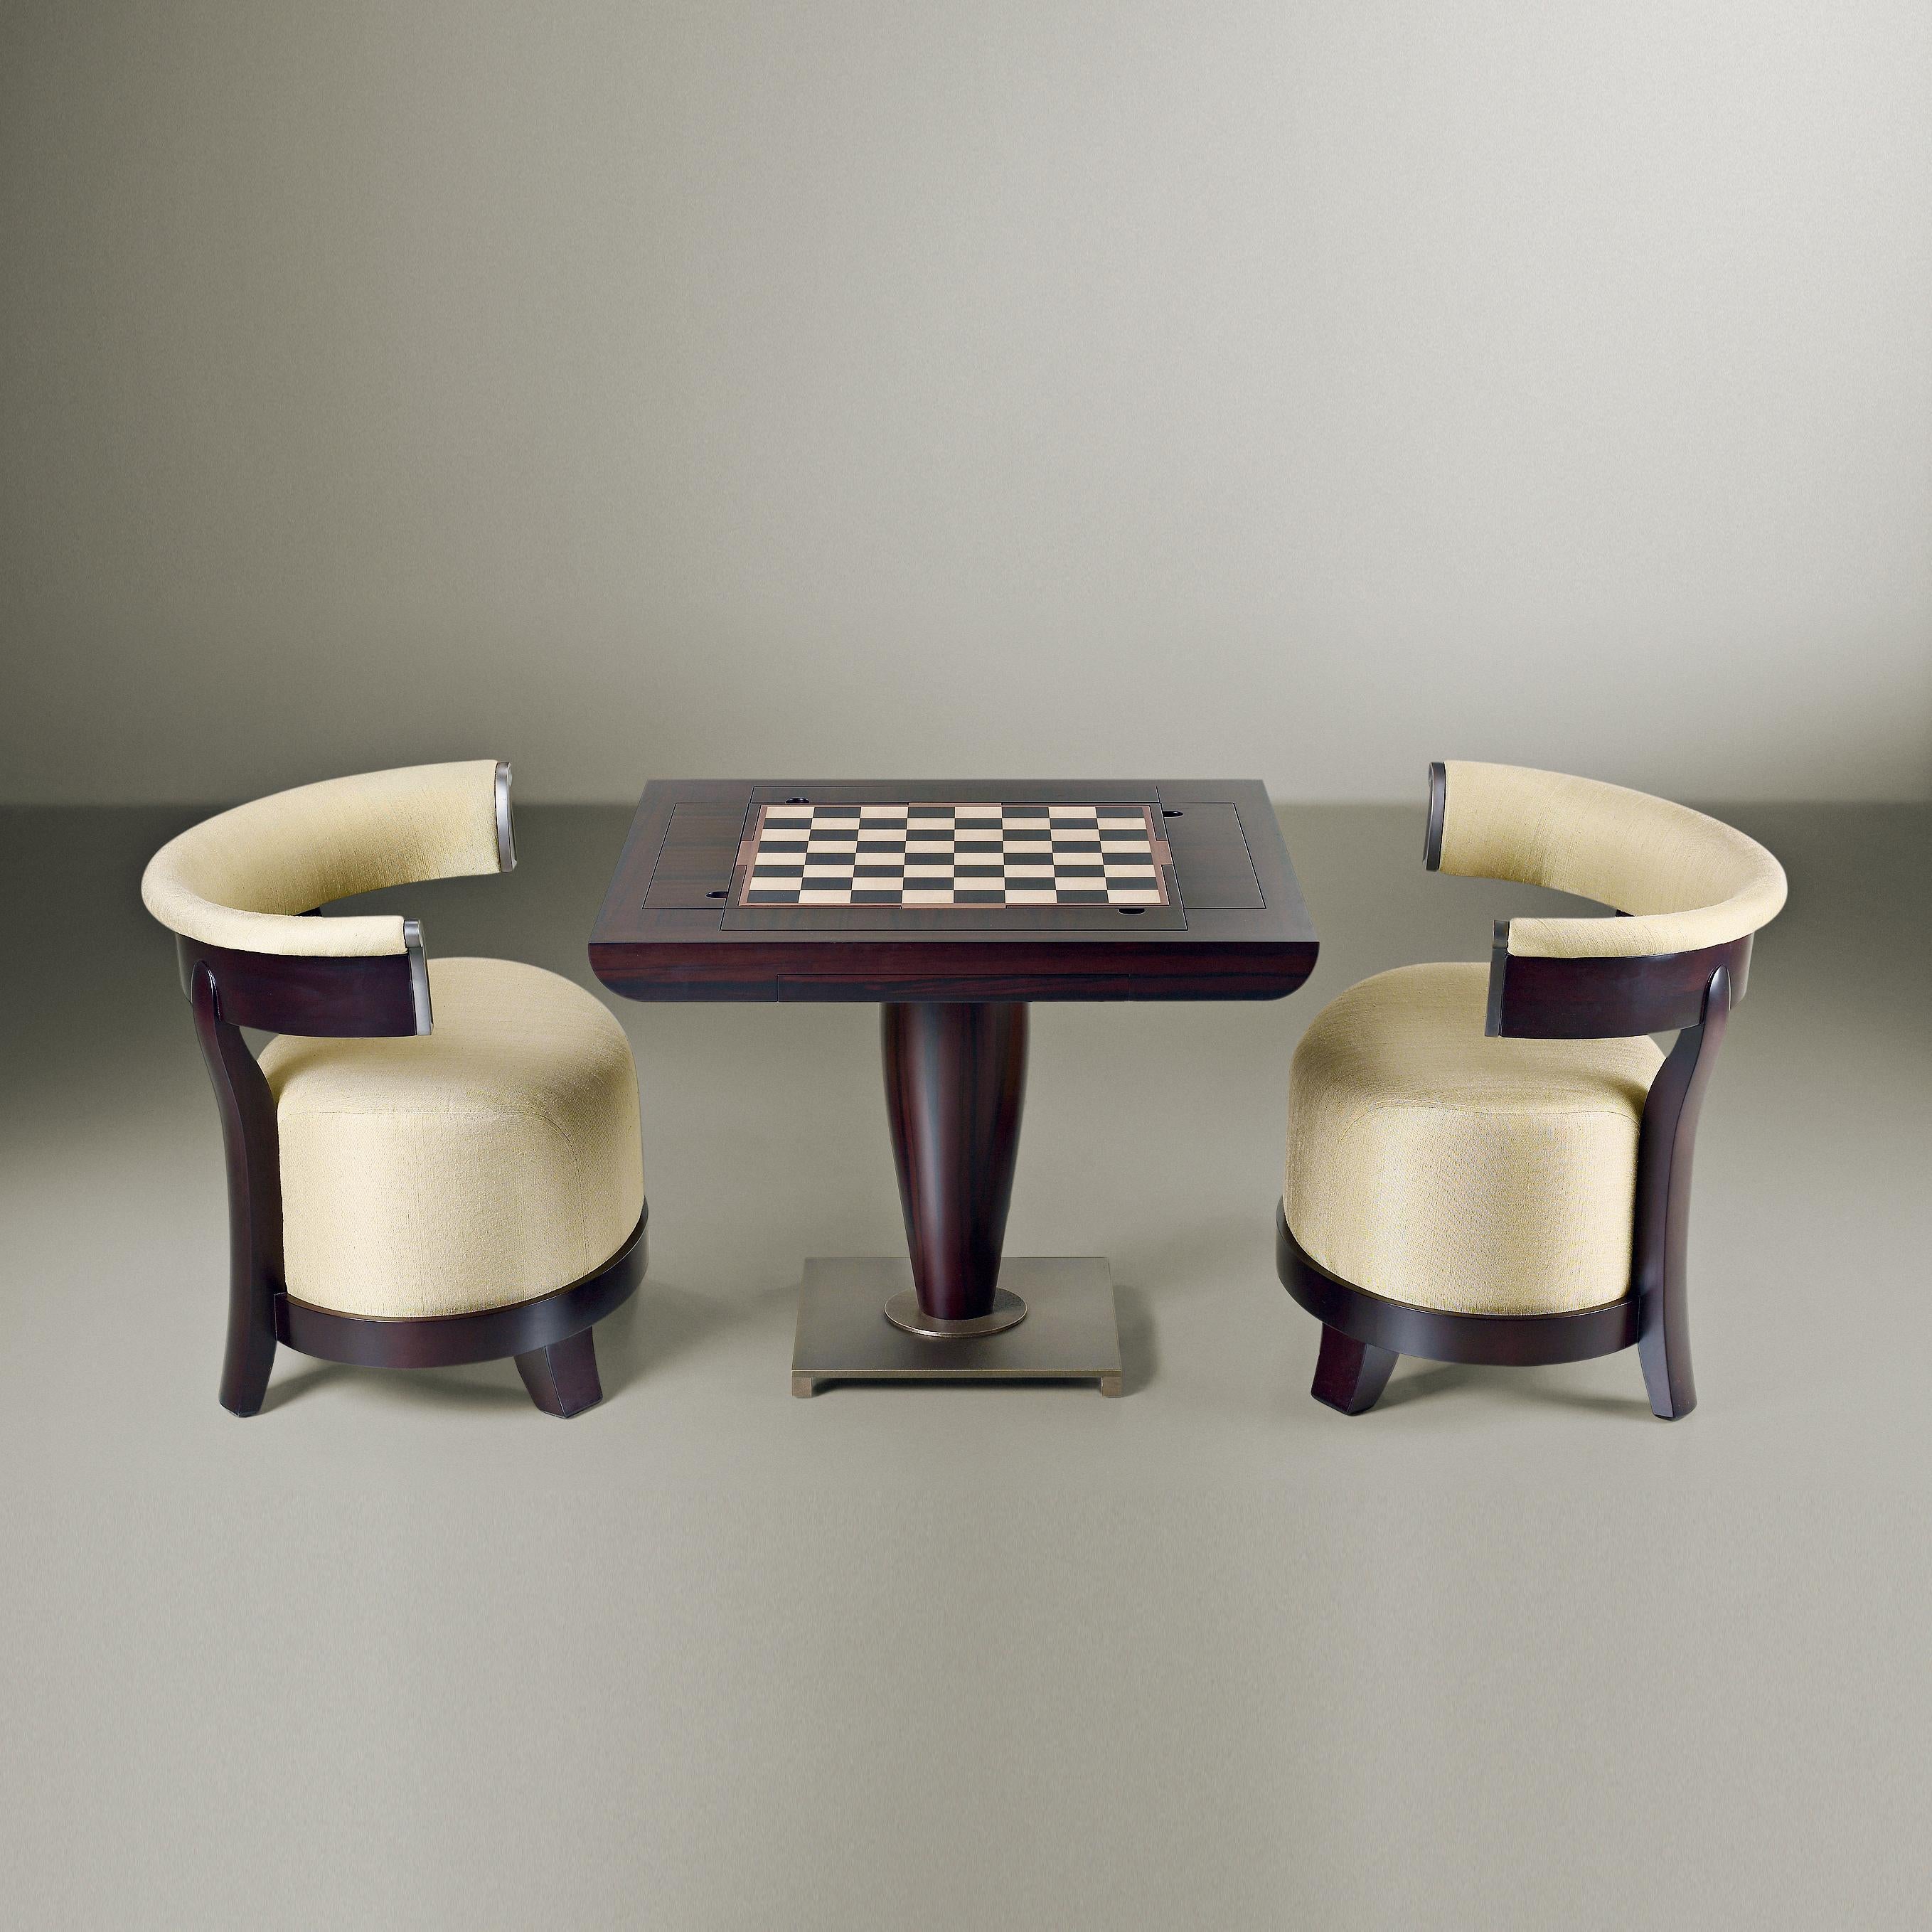 Bassano da Gioco game table is part of a large family of tables, Promemoria's bestsellers, which is characterized by a shaped and curved column which supports the table top as a work of architecture with solid foundations. The base is in bronze.